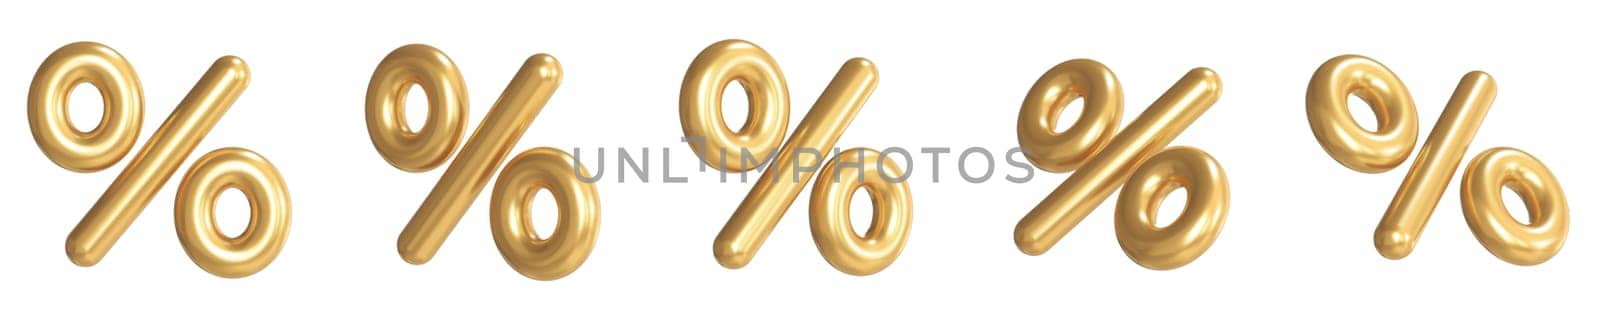 Set of golden percent signs different angles 3D by djmilic